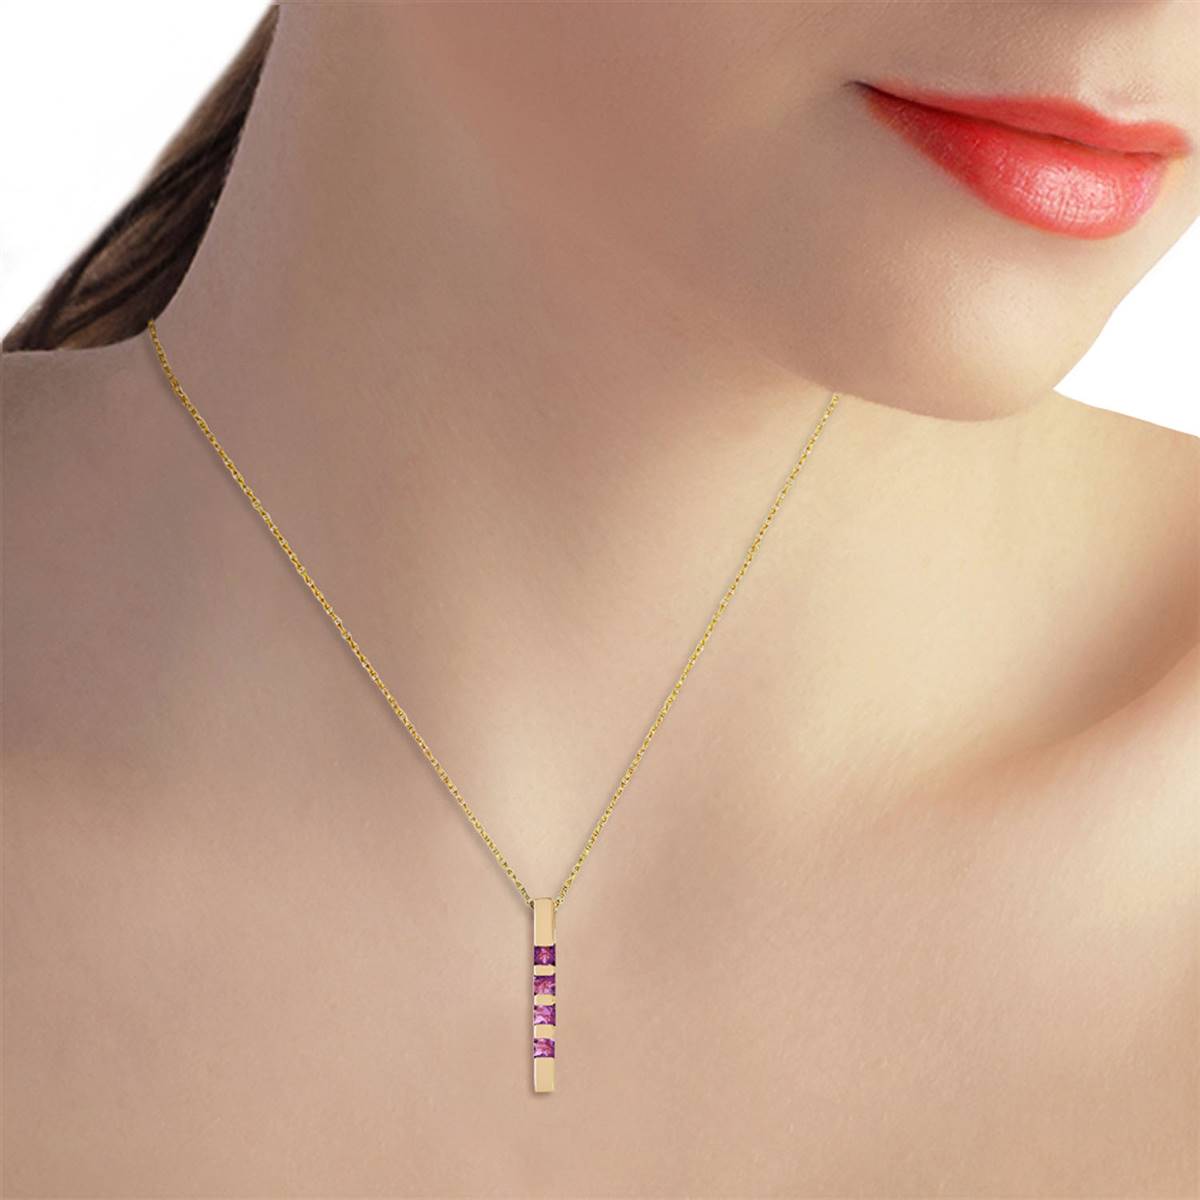 0.35 Carat 14K Solid Yellow Gold Necklace Bar Natural Purple Amethyst